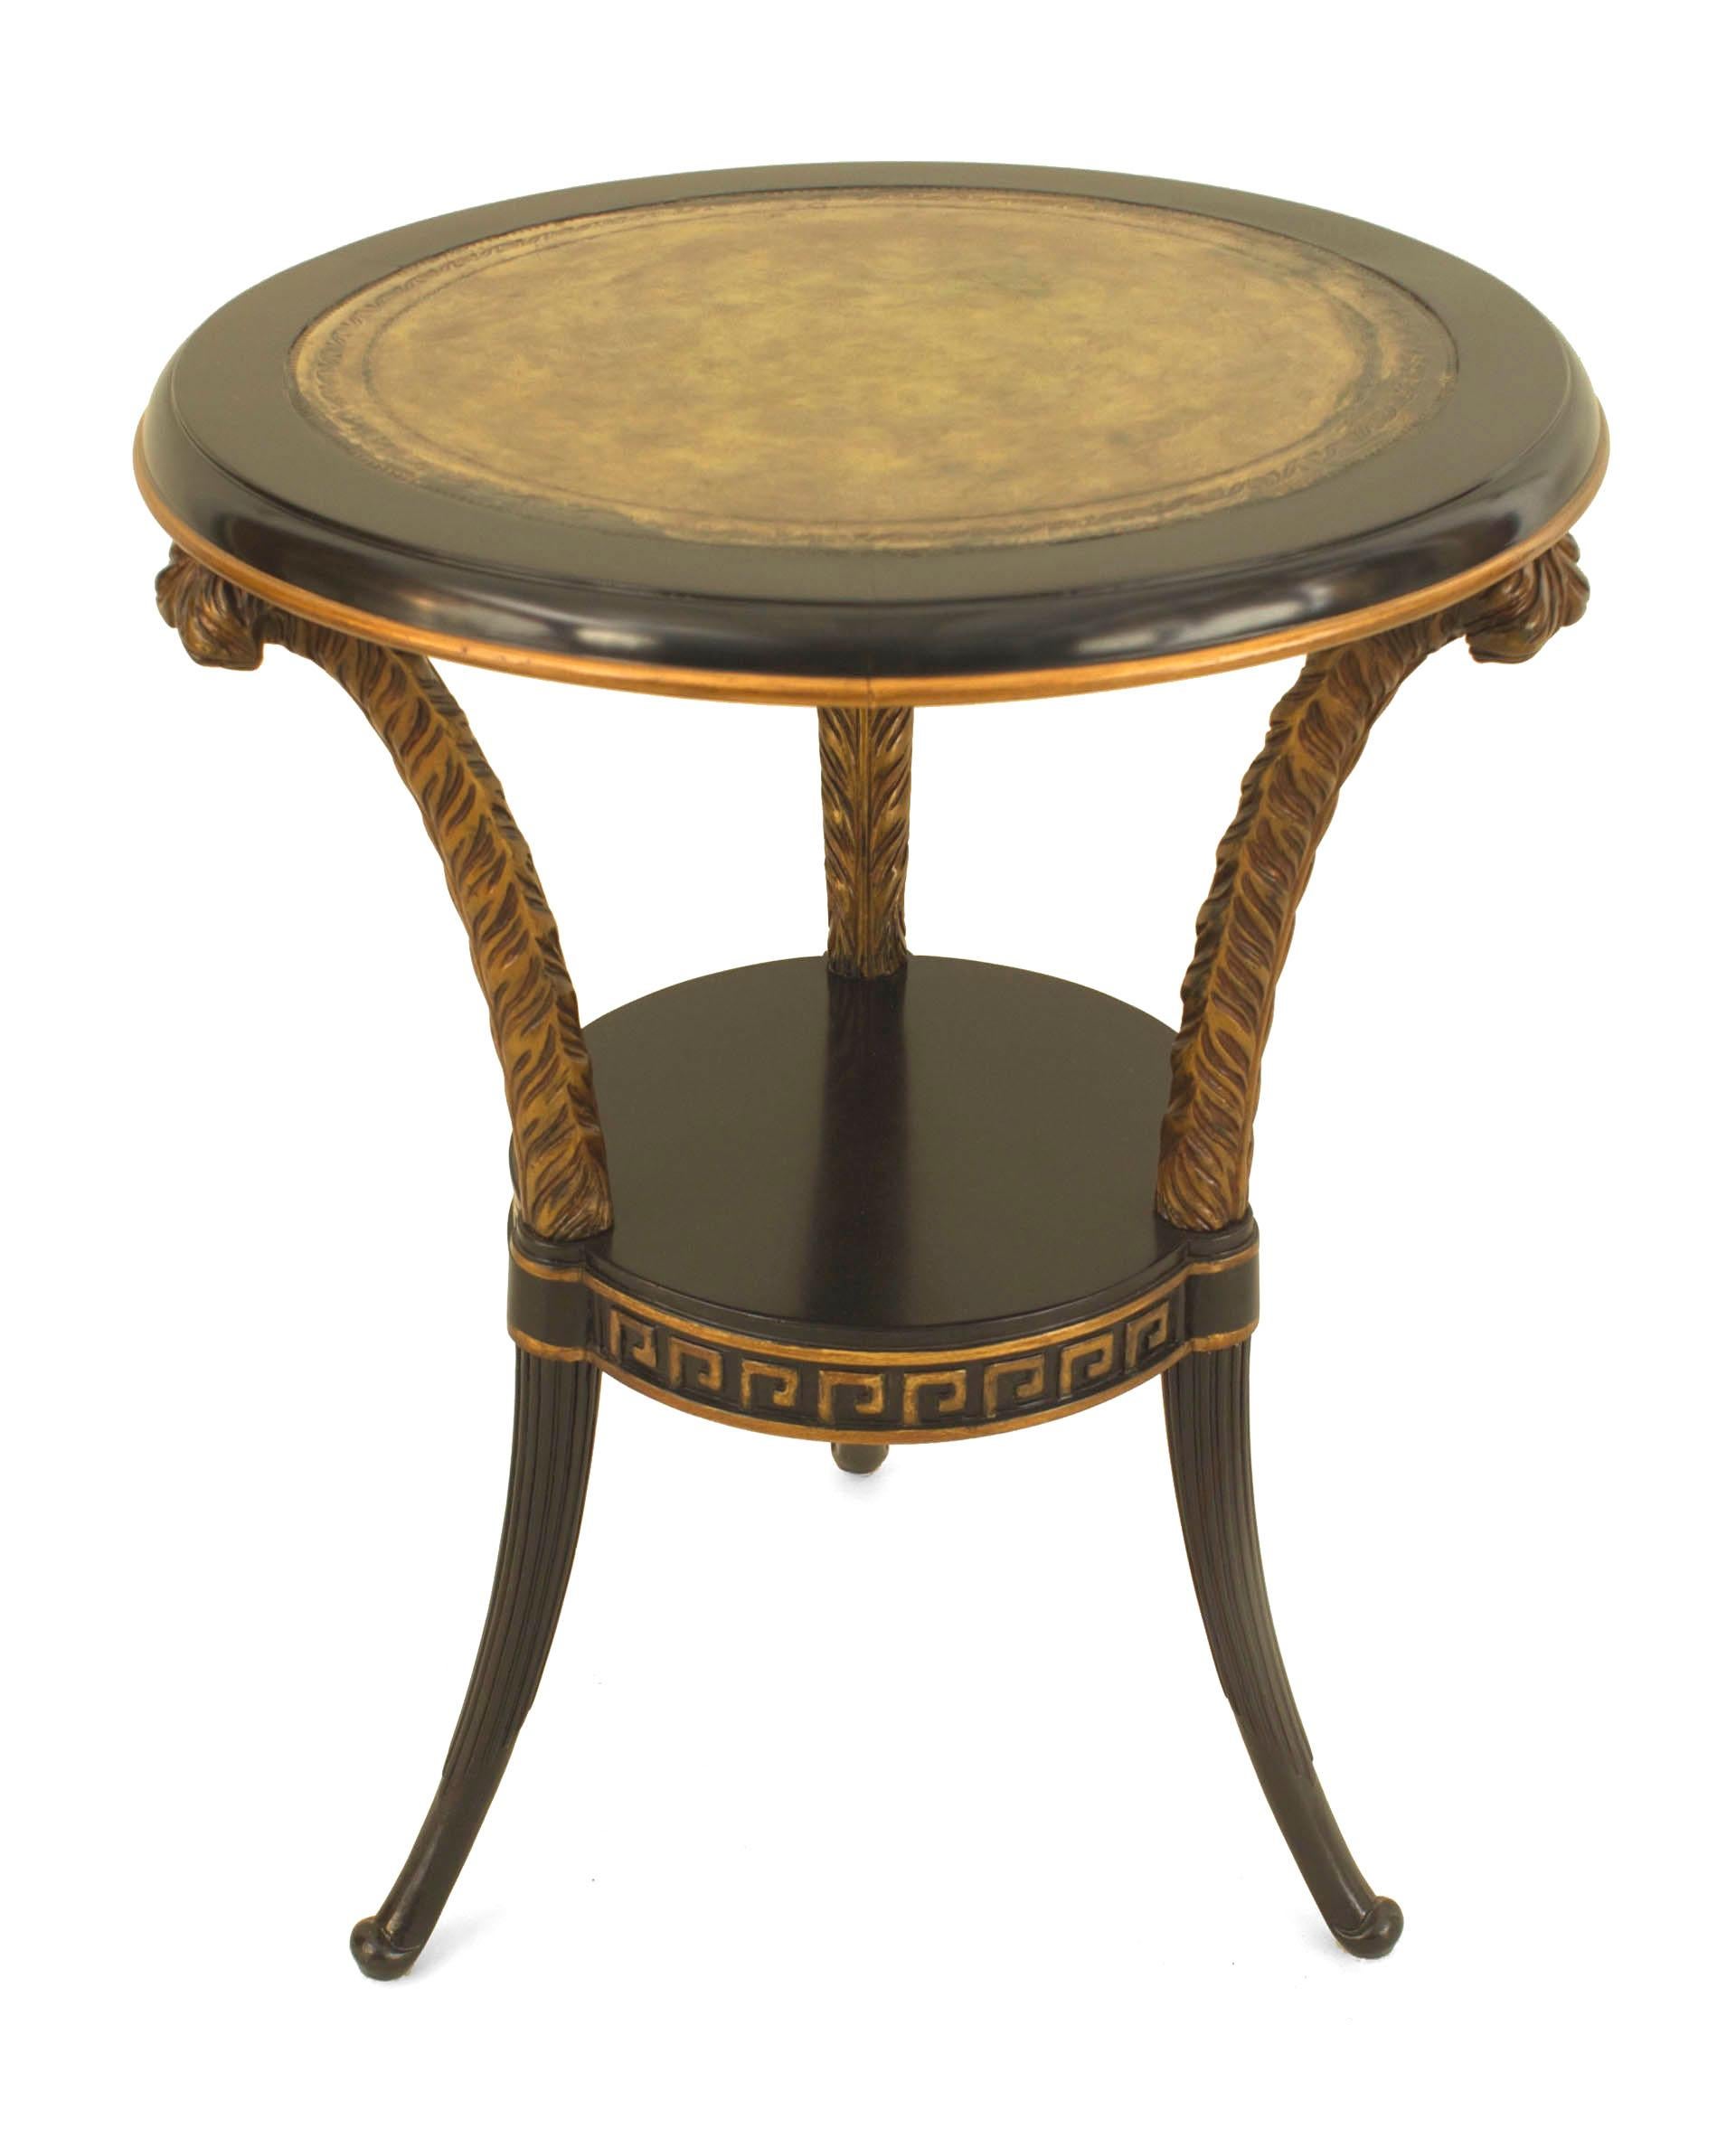 Pair of French Regency-style (1940s) ebonized round end tables with 3 plume carved leg connected by a round shelf stretcher having a Greek key design and decorated top. (Attributed to MAISON JANSEN) (PRICED AS Pair).
 